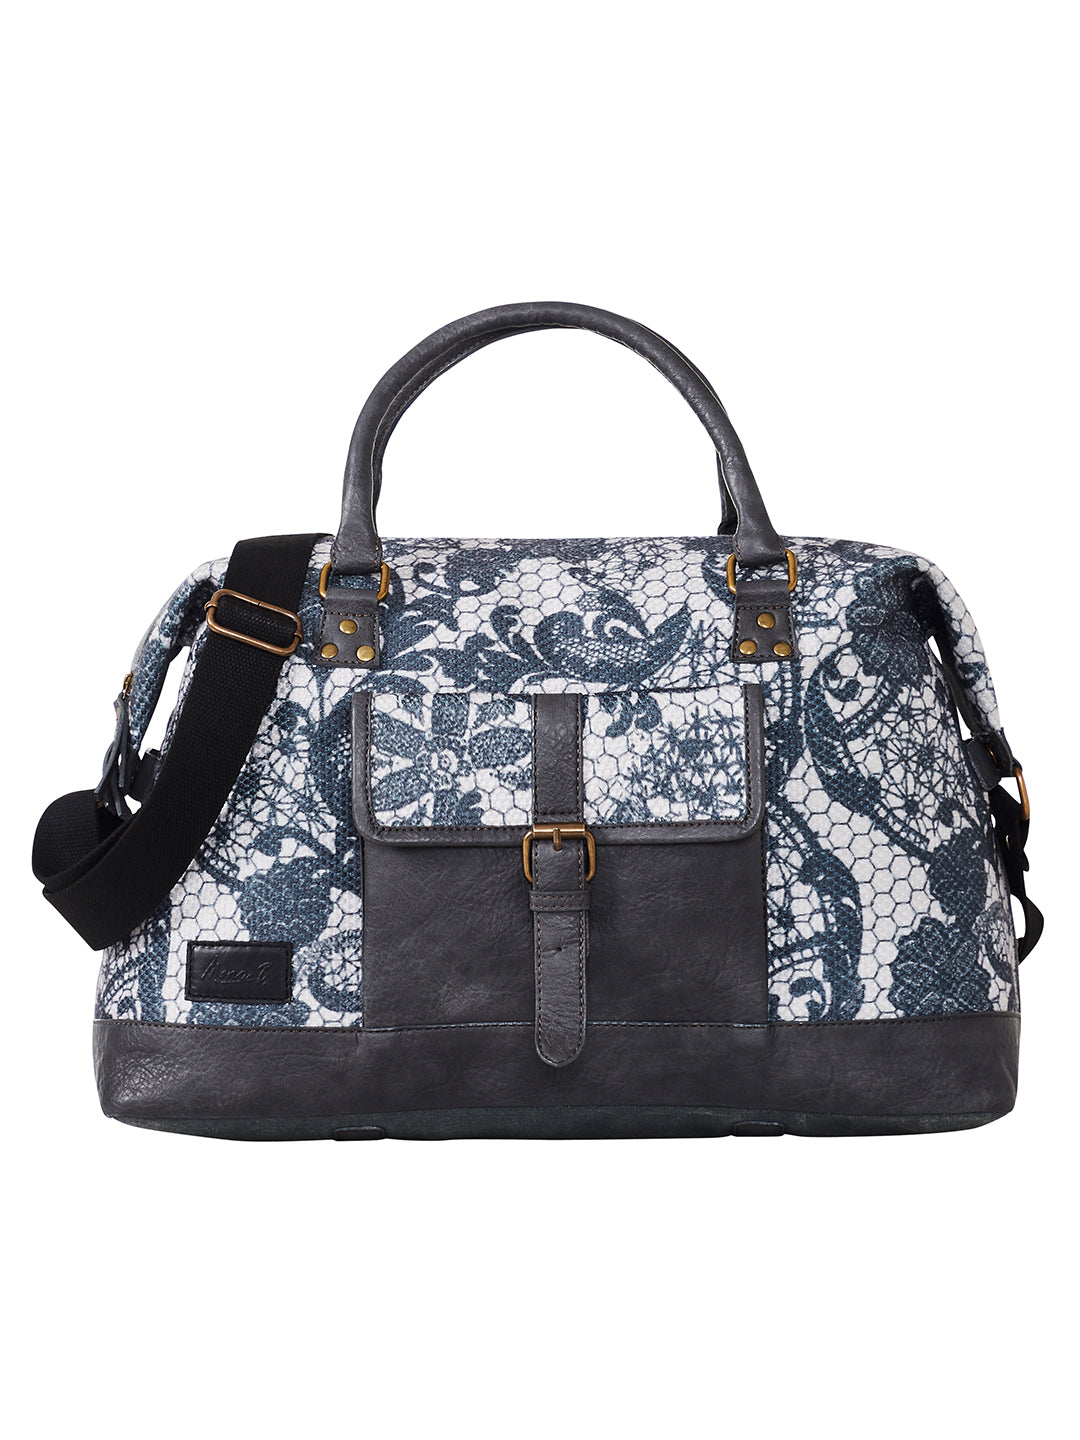 Mona B Large Kilim Inspired Duffel Gym Travel and Sports Bag with Outside Pocket and Stylish Design for Women: Grey